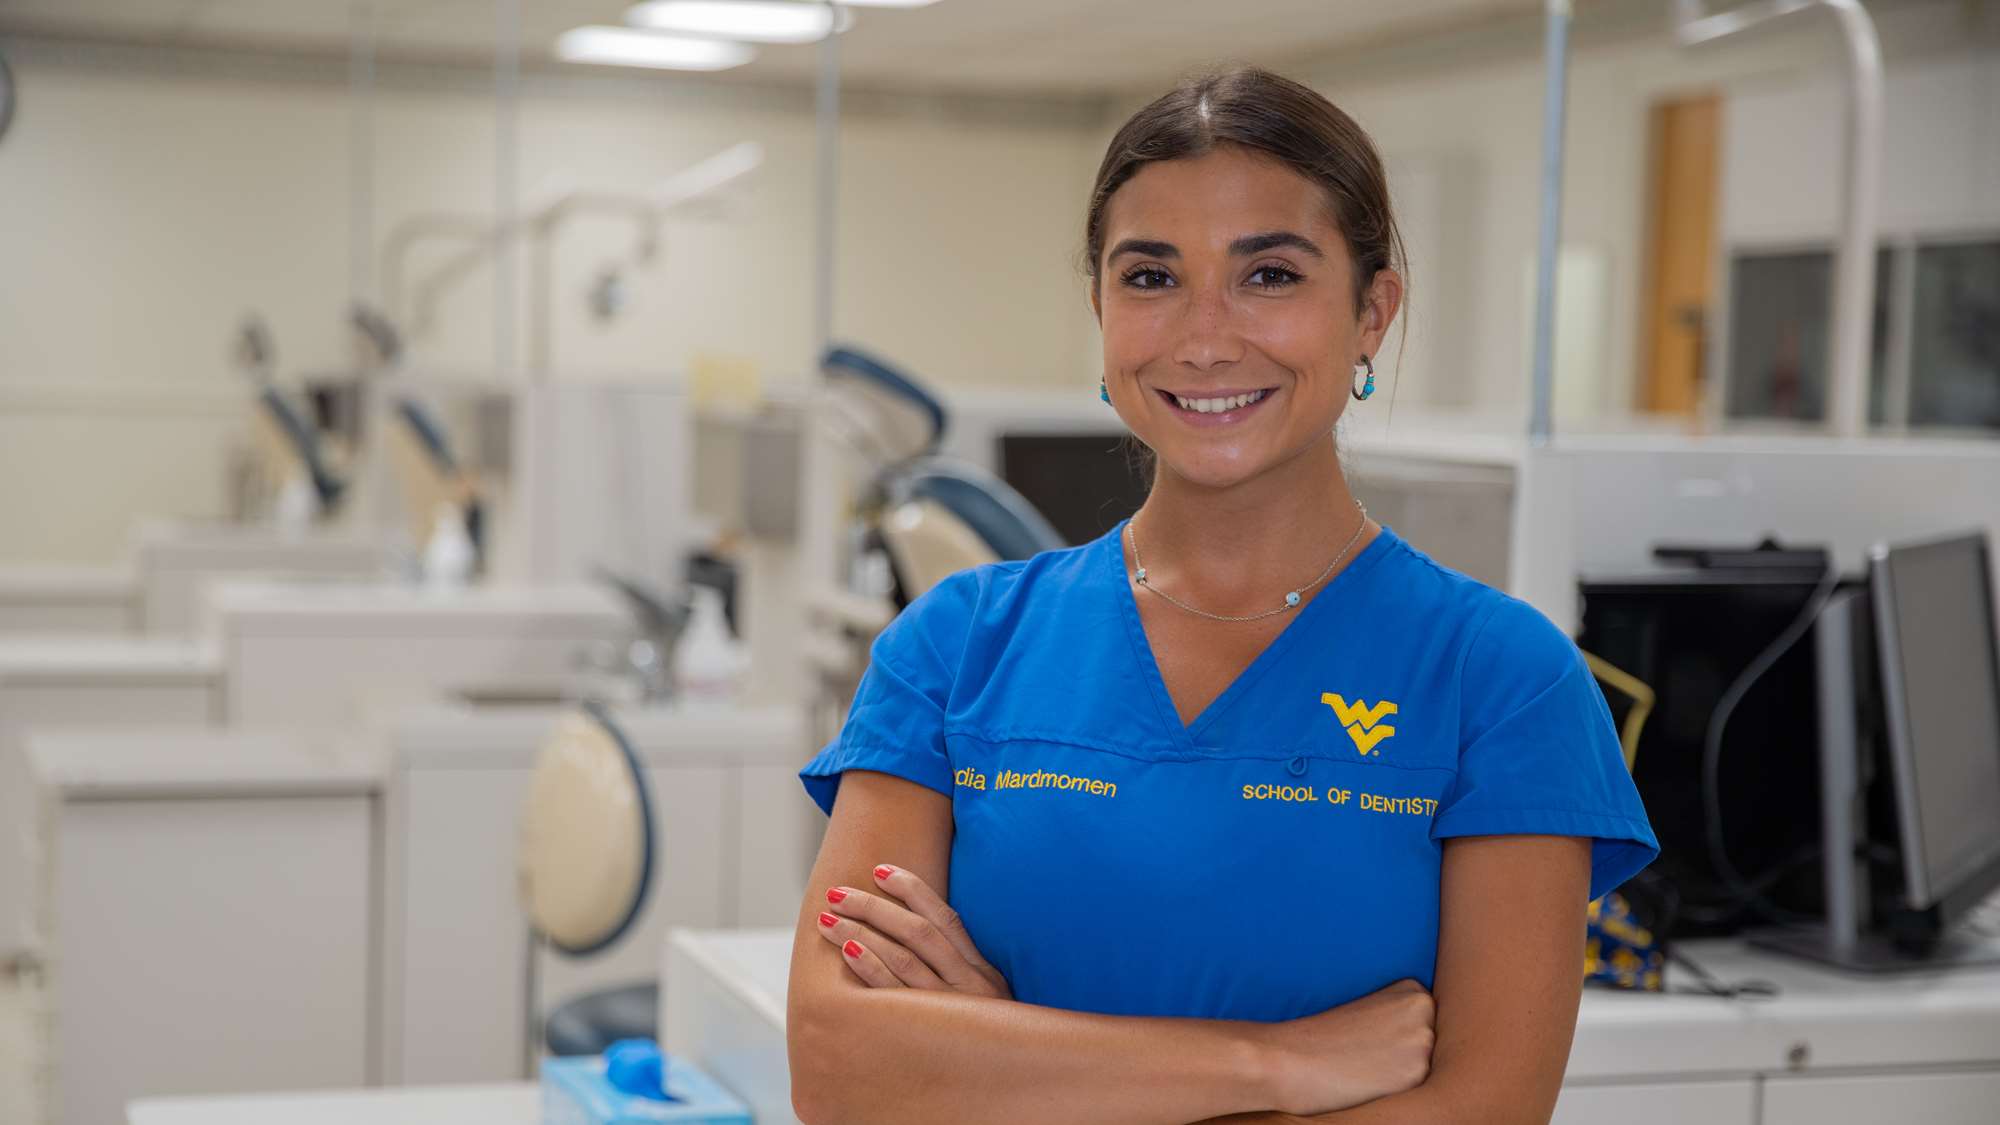 Nadia Mardmomen smiles in clinic as she talks about her path through dental school.